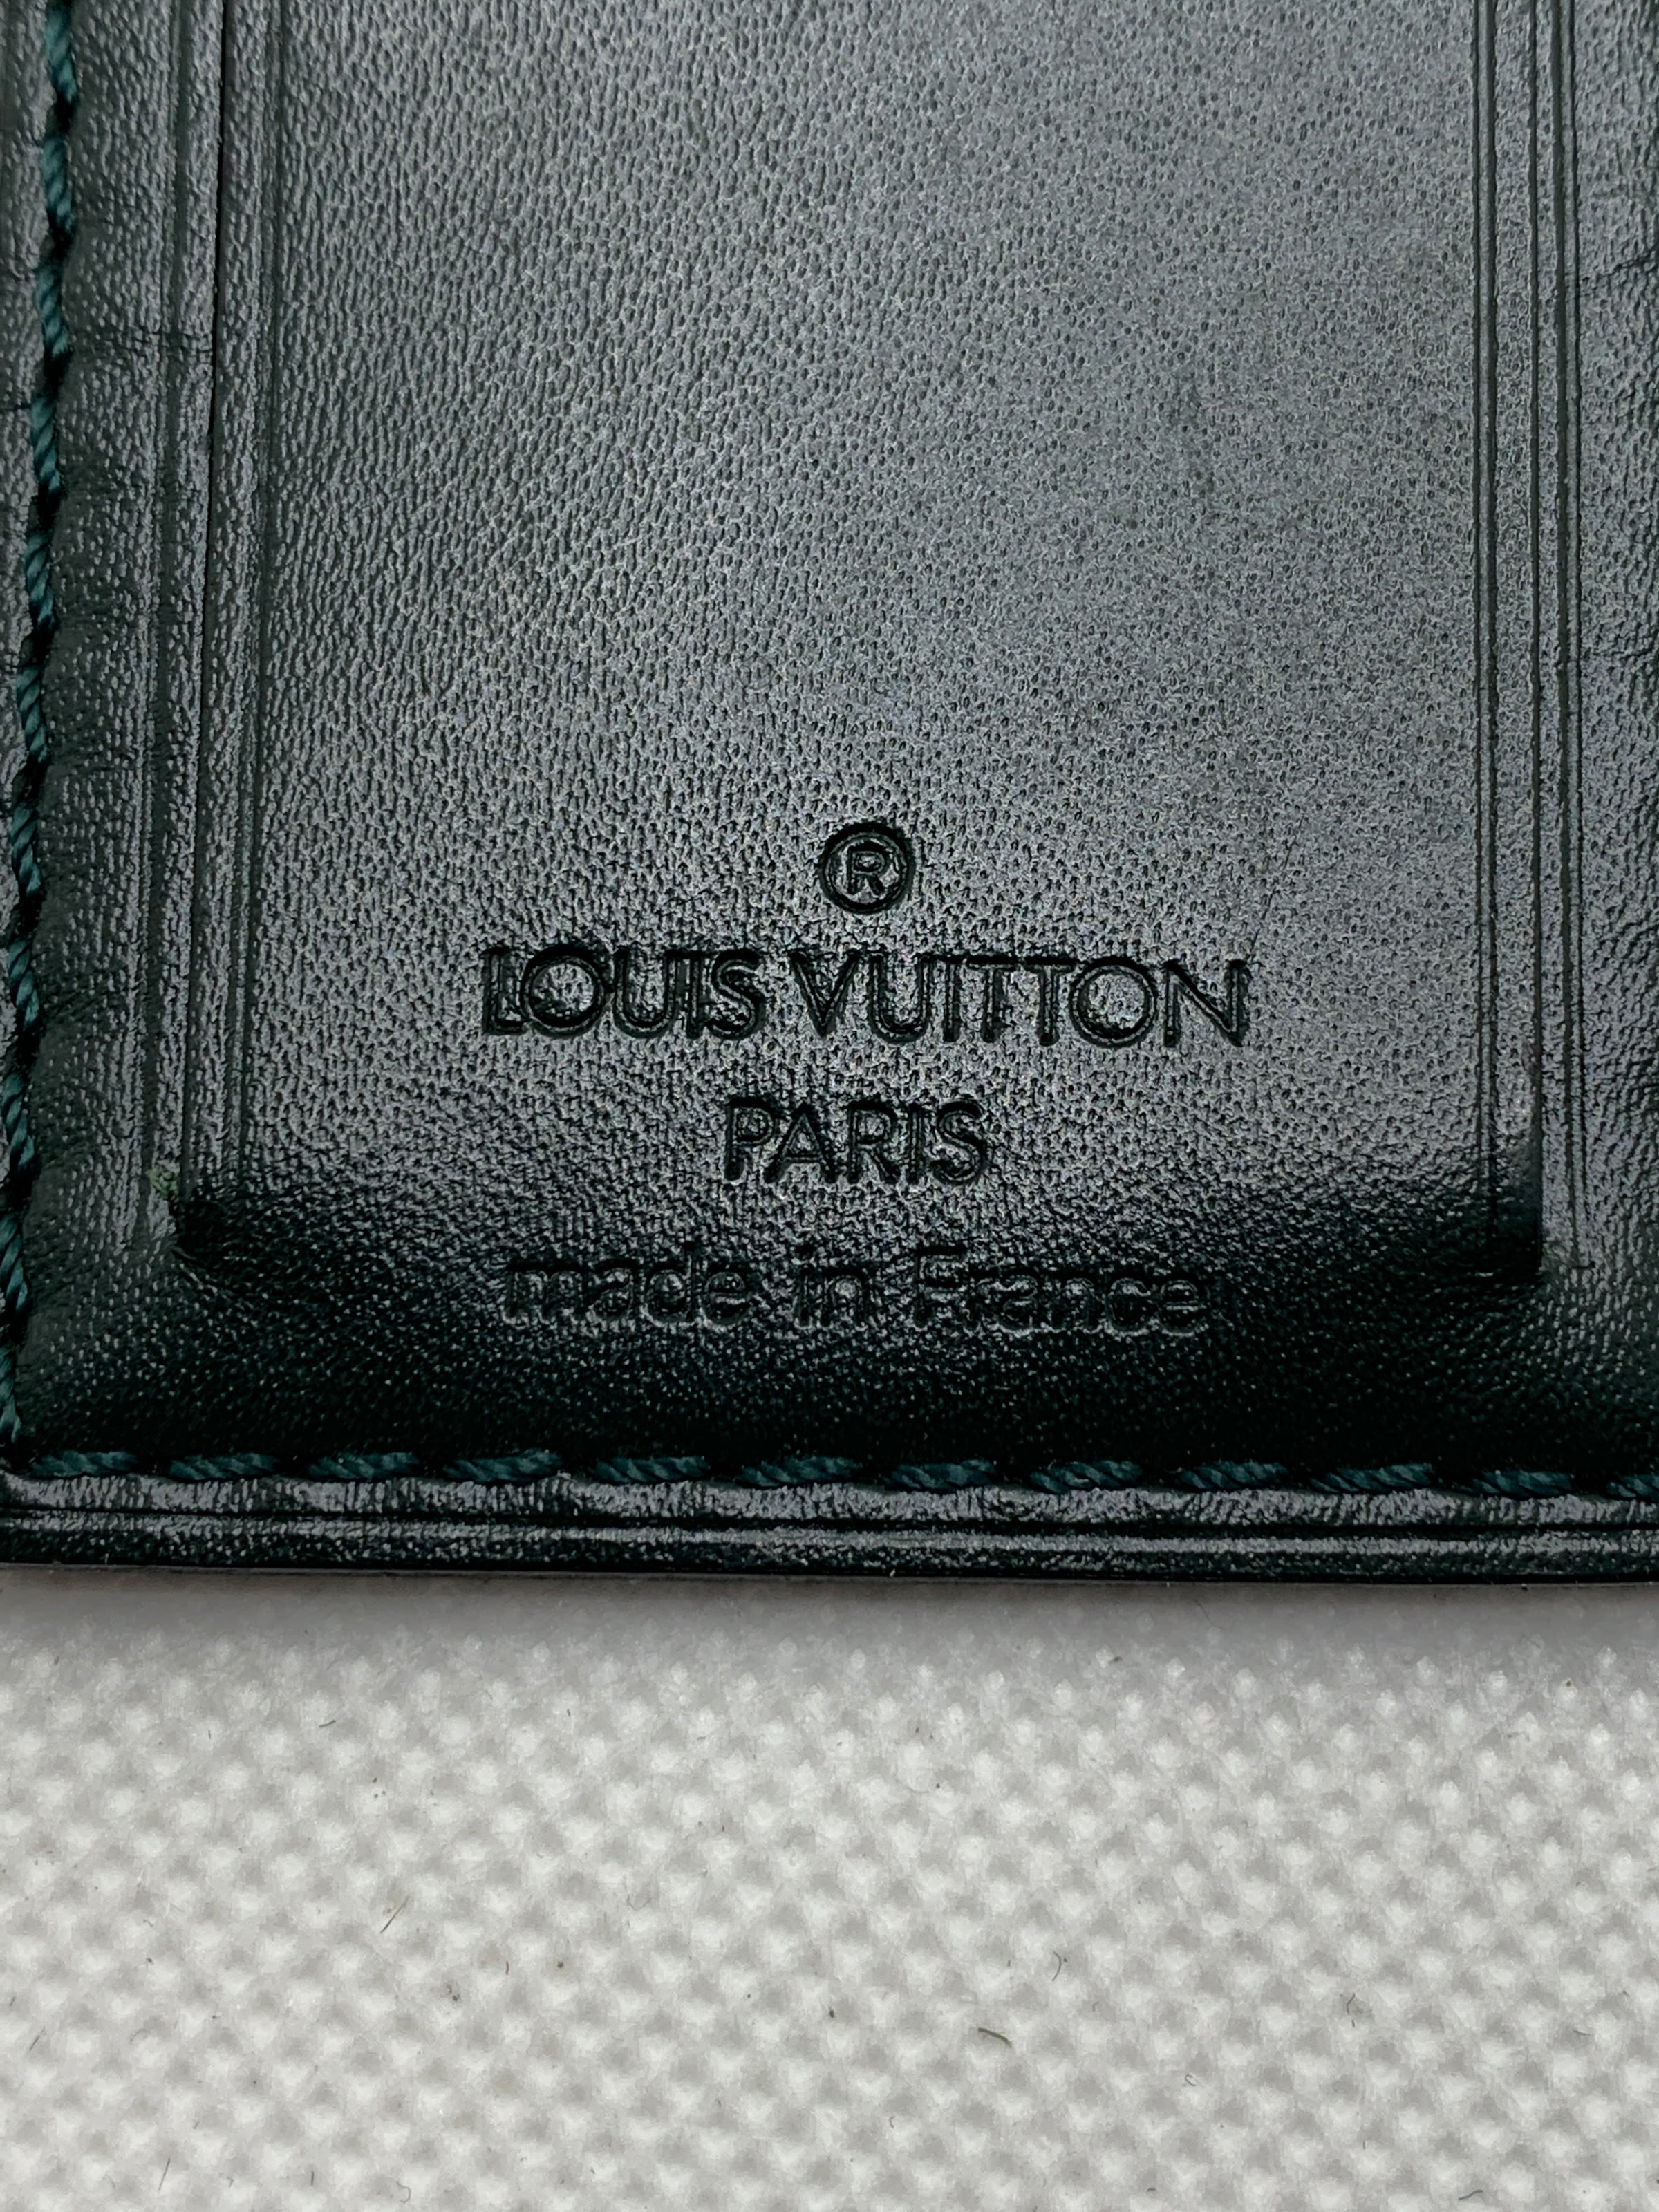 Authentic Louis Vuitton Large Dark Green Leather Luggage Tag